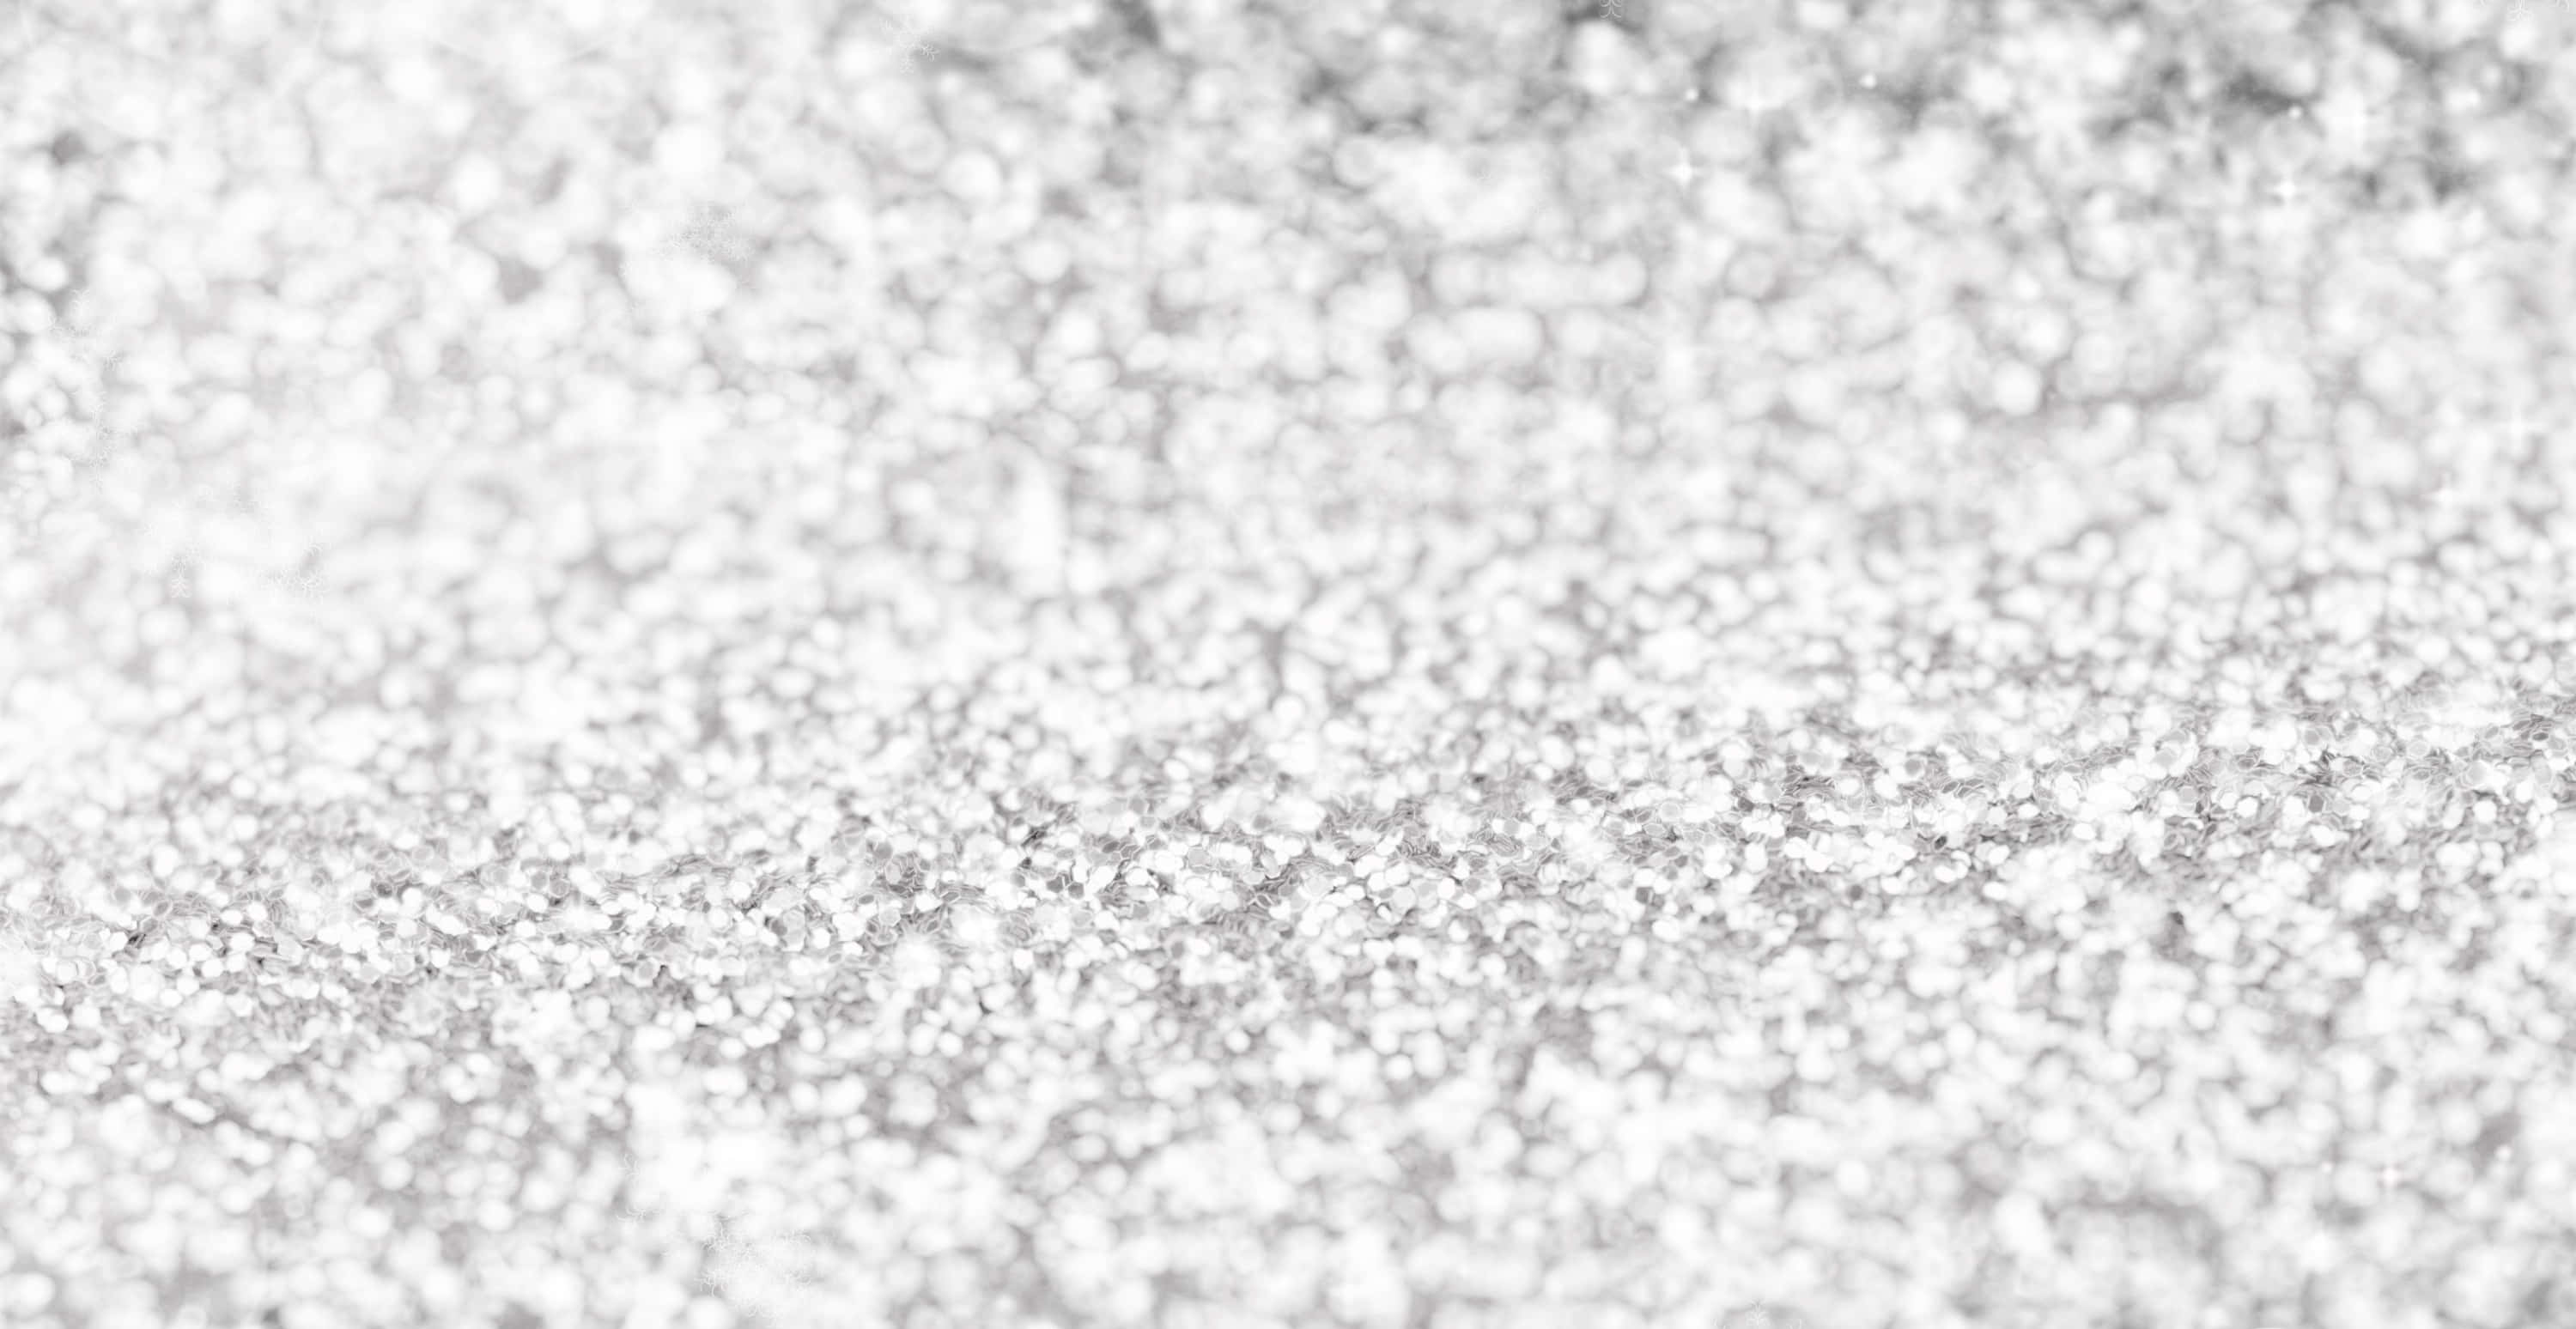 Add a spark of light with a white glitter background.